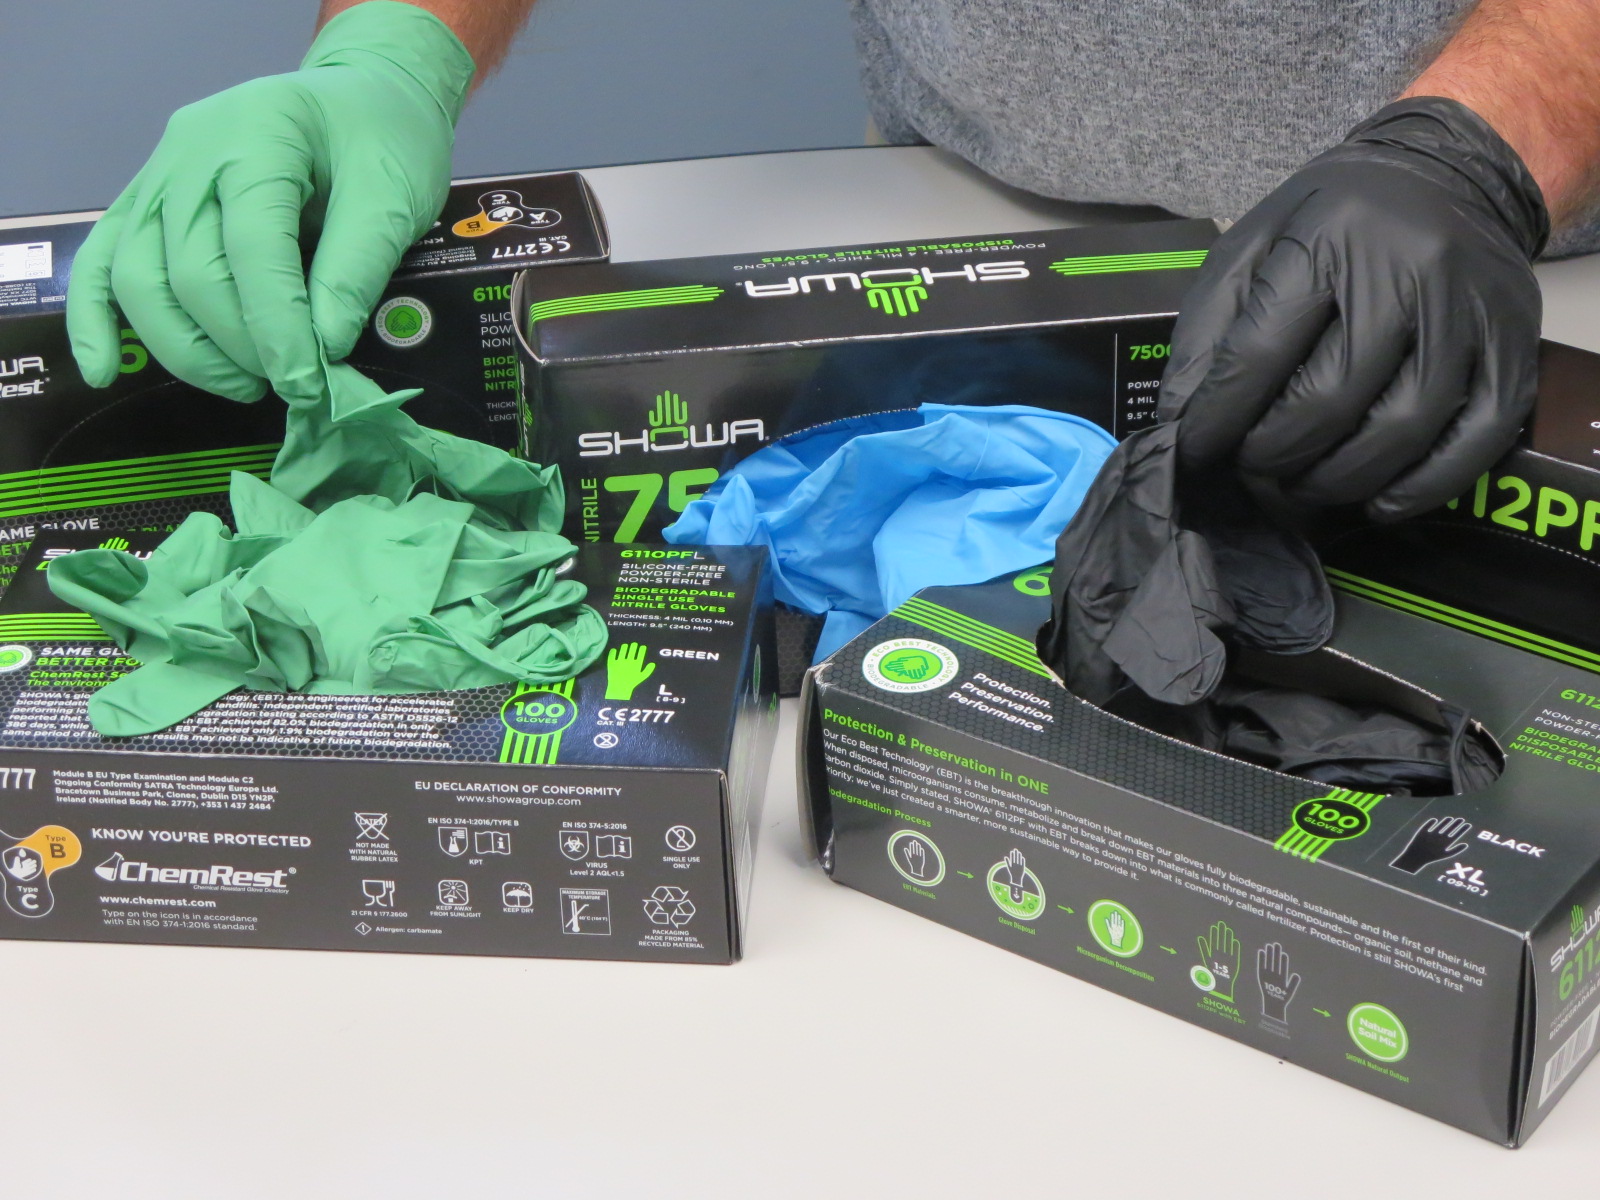 SHOWA® biodegradable single-use nitrile gloves featuring EBT Technology in colors blue, green and black